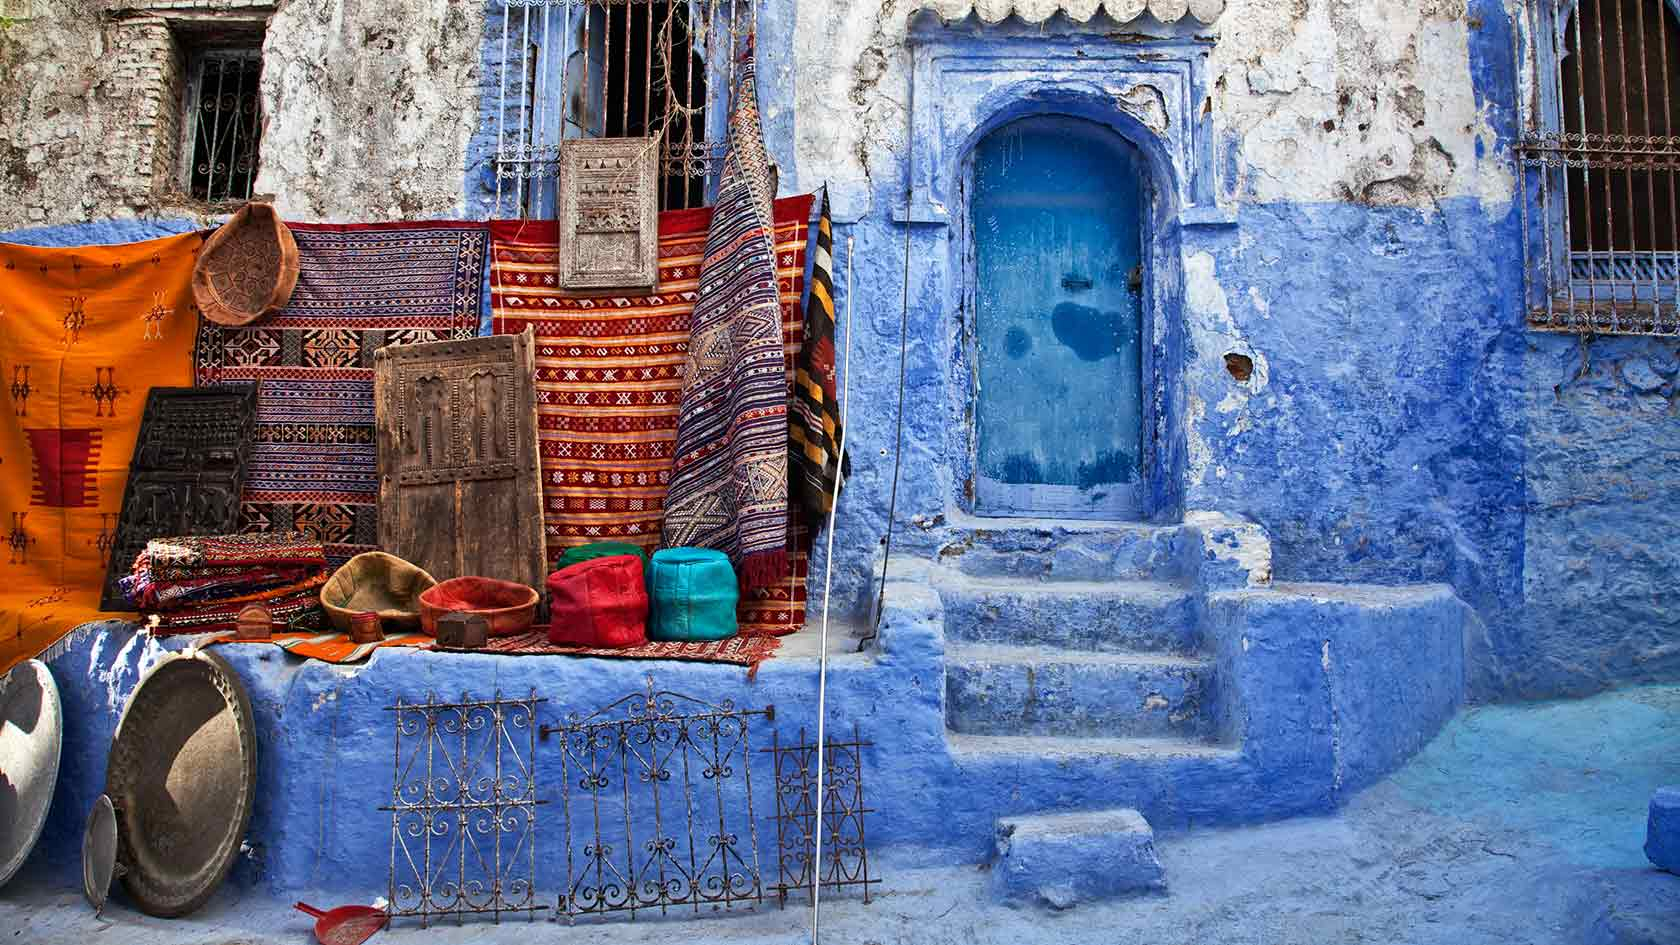 Fes Chaouen the Blue City 3 Nights Semester At Sea